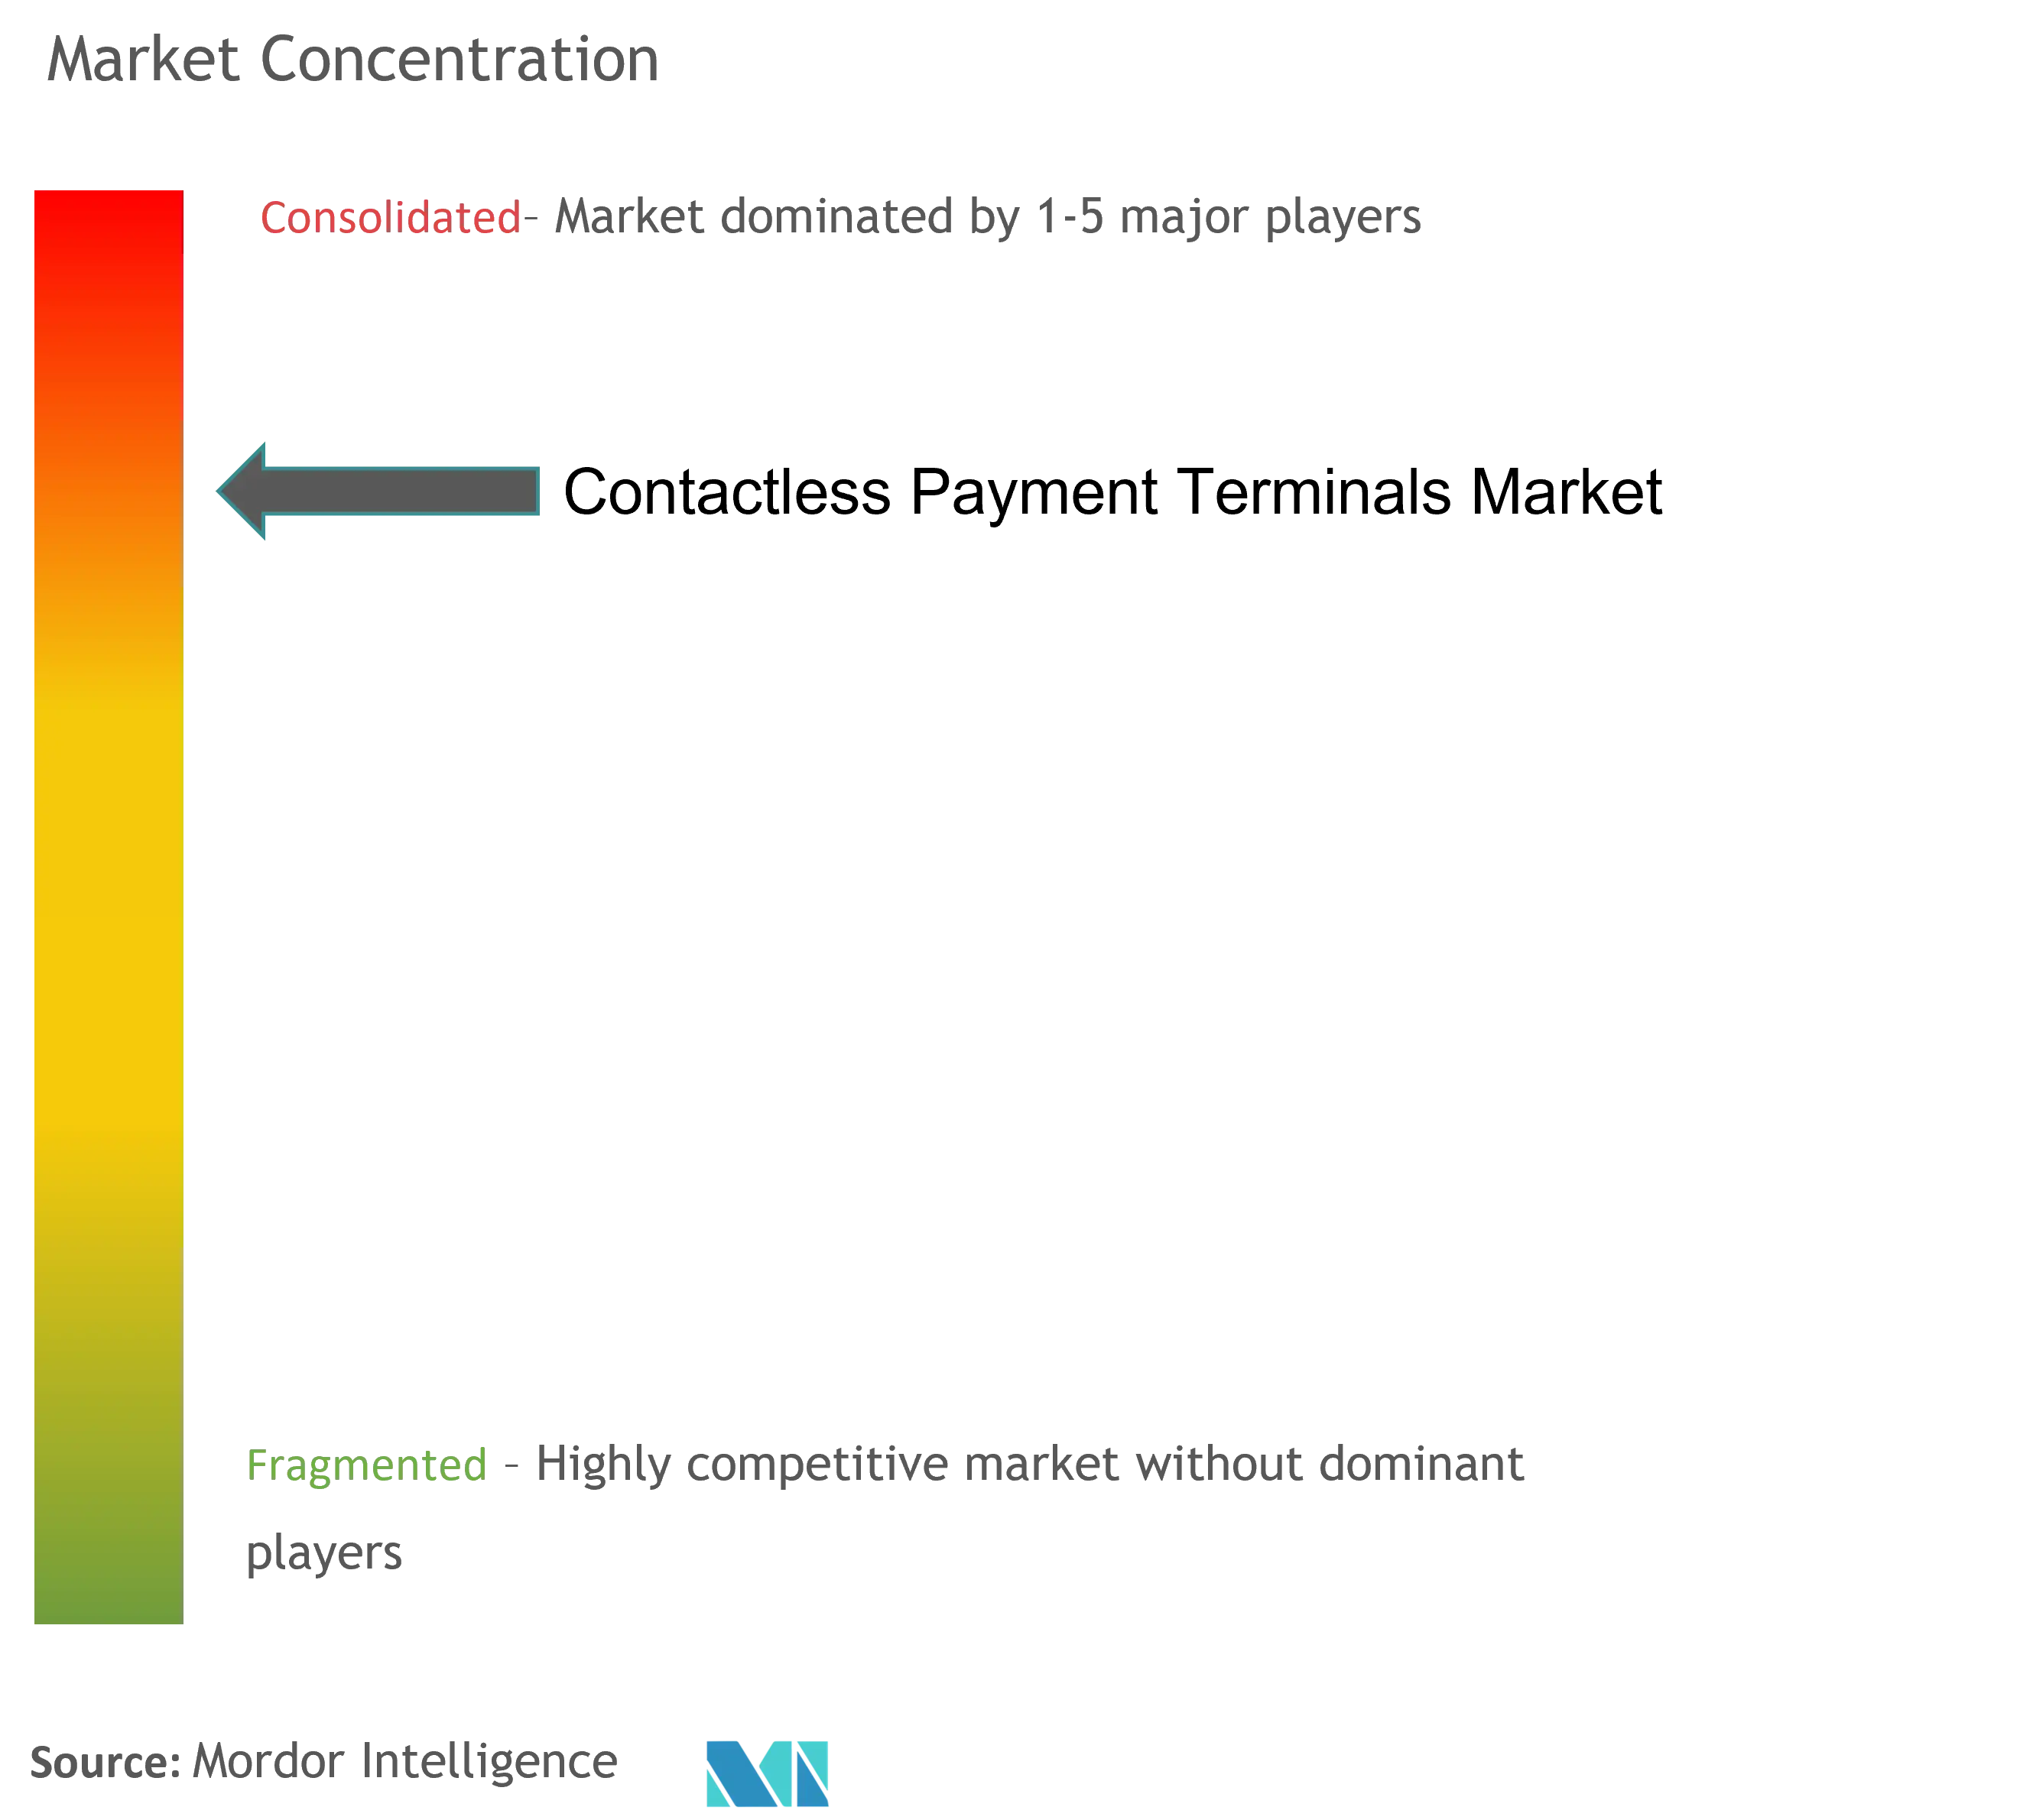 Contactless Payment Terminals Market Concentration